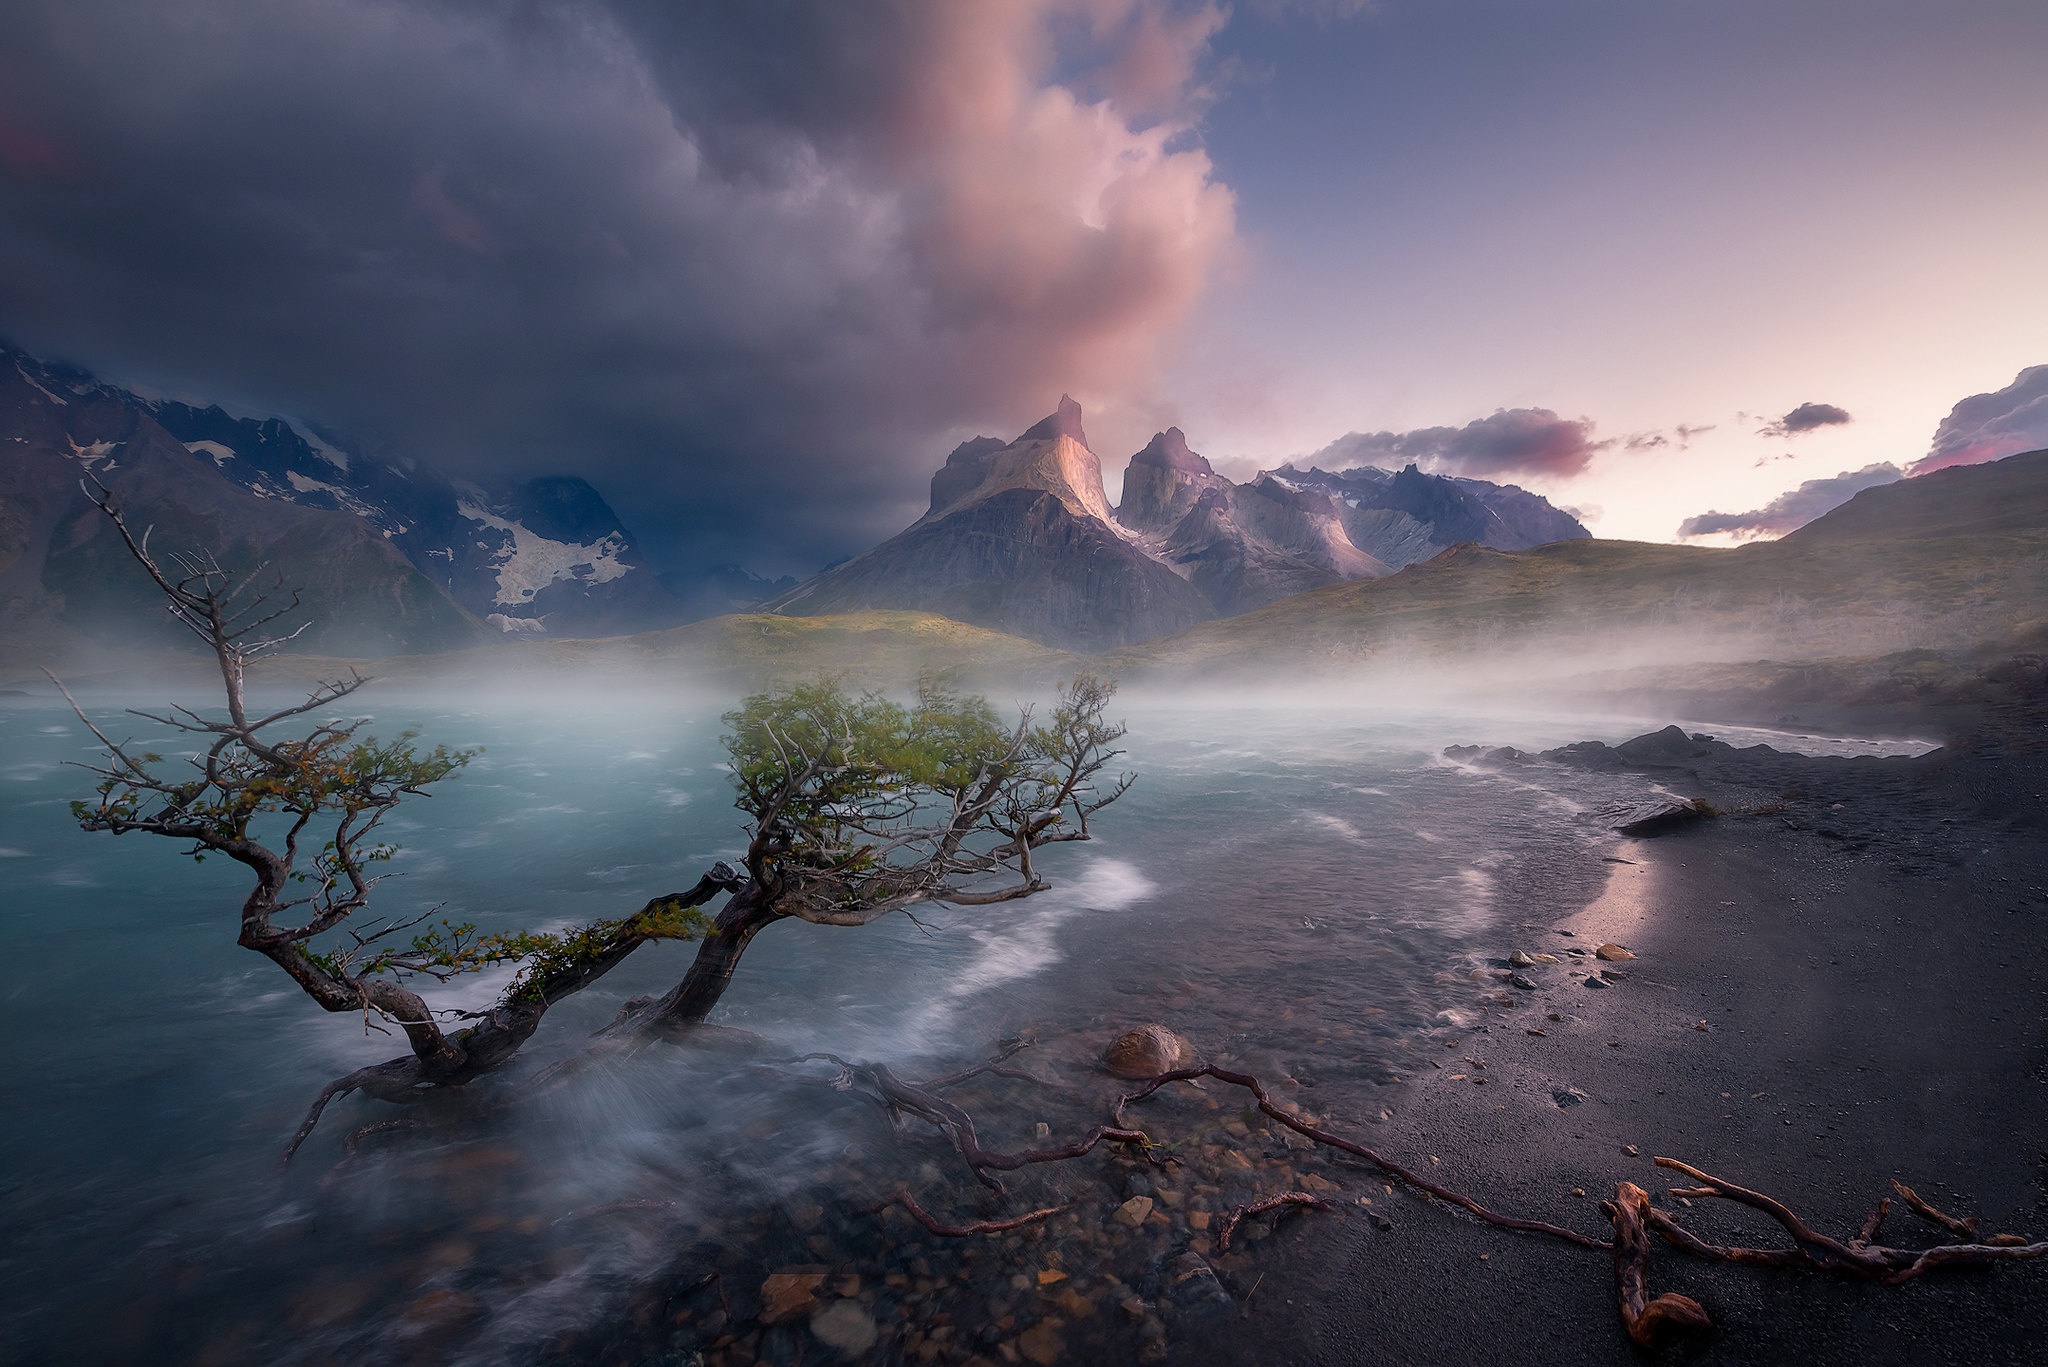 General 2048x1367 Patagonia nature water landscape mountains